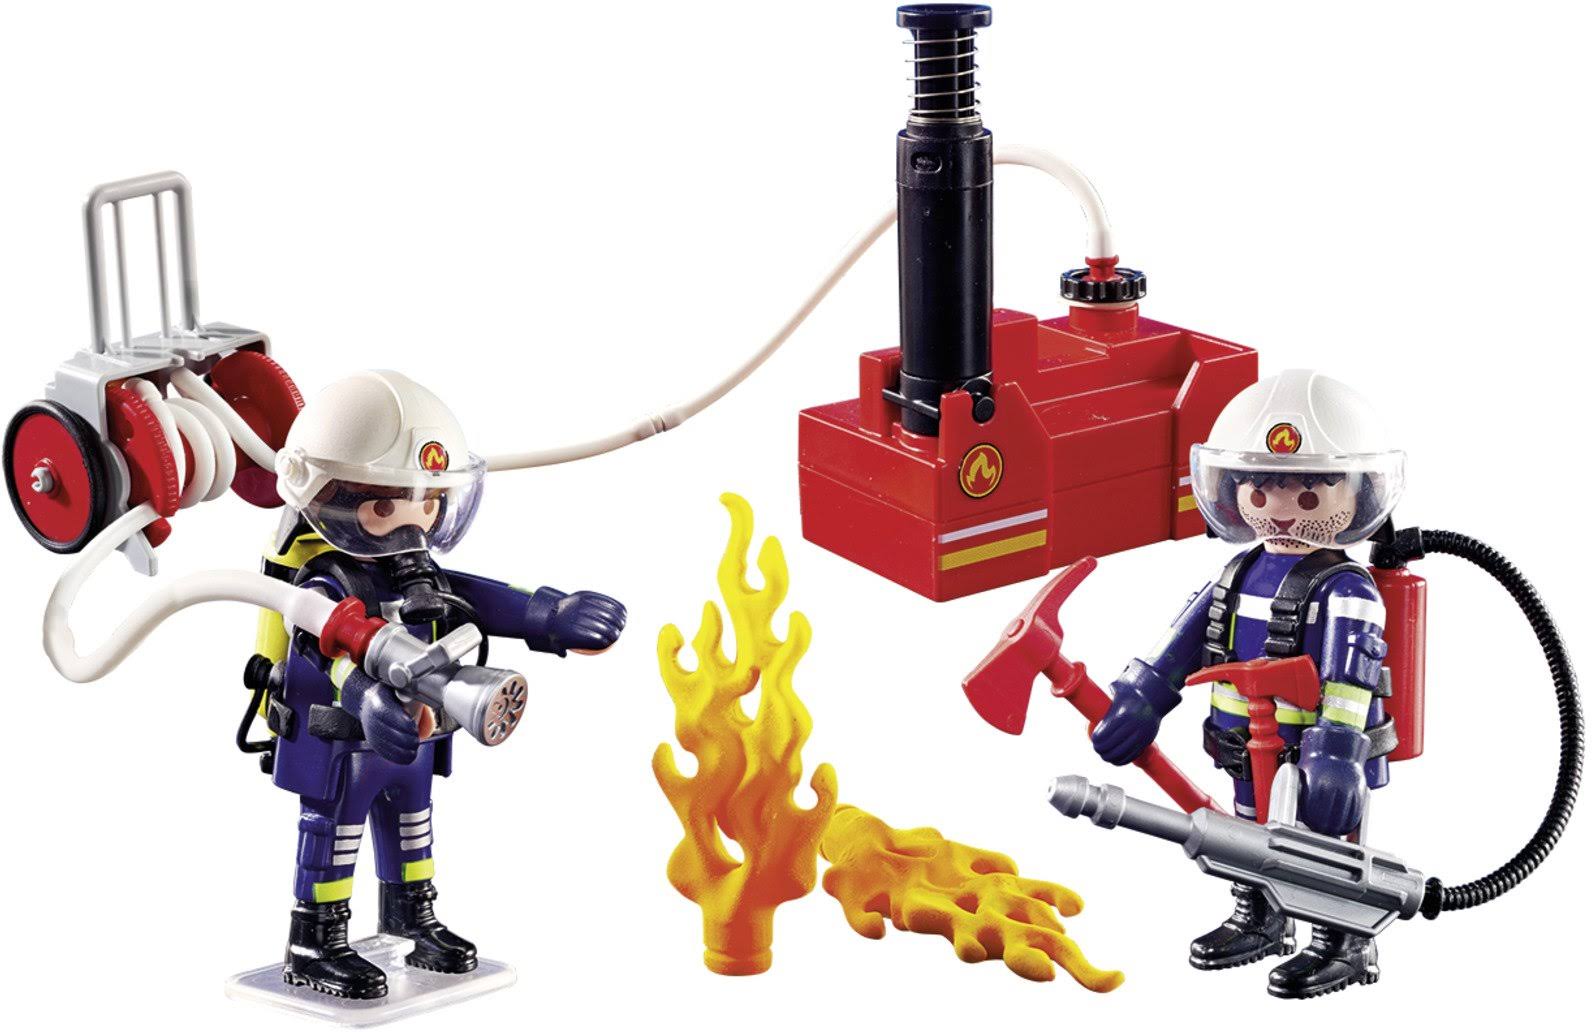 Playmobil 4825 Fire Fighters Playset - With Water Pump